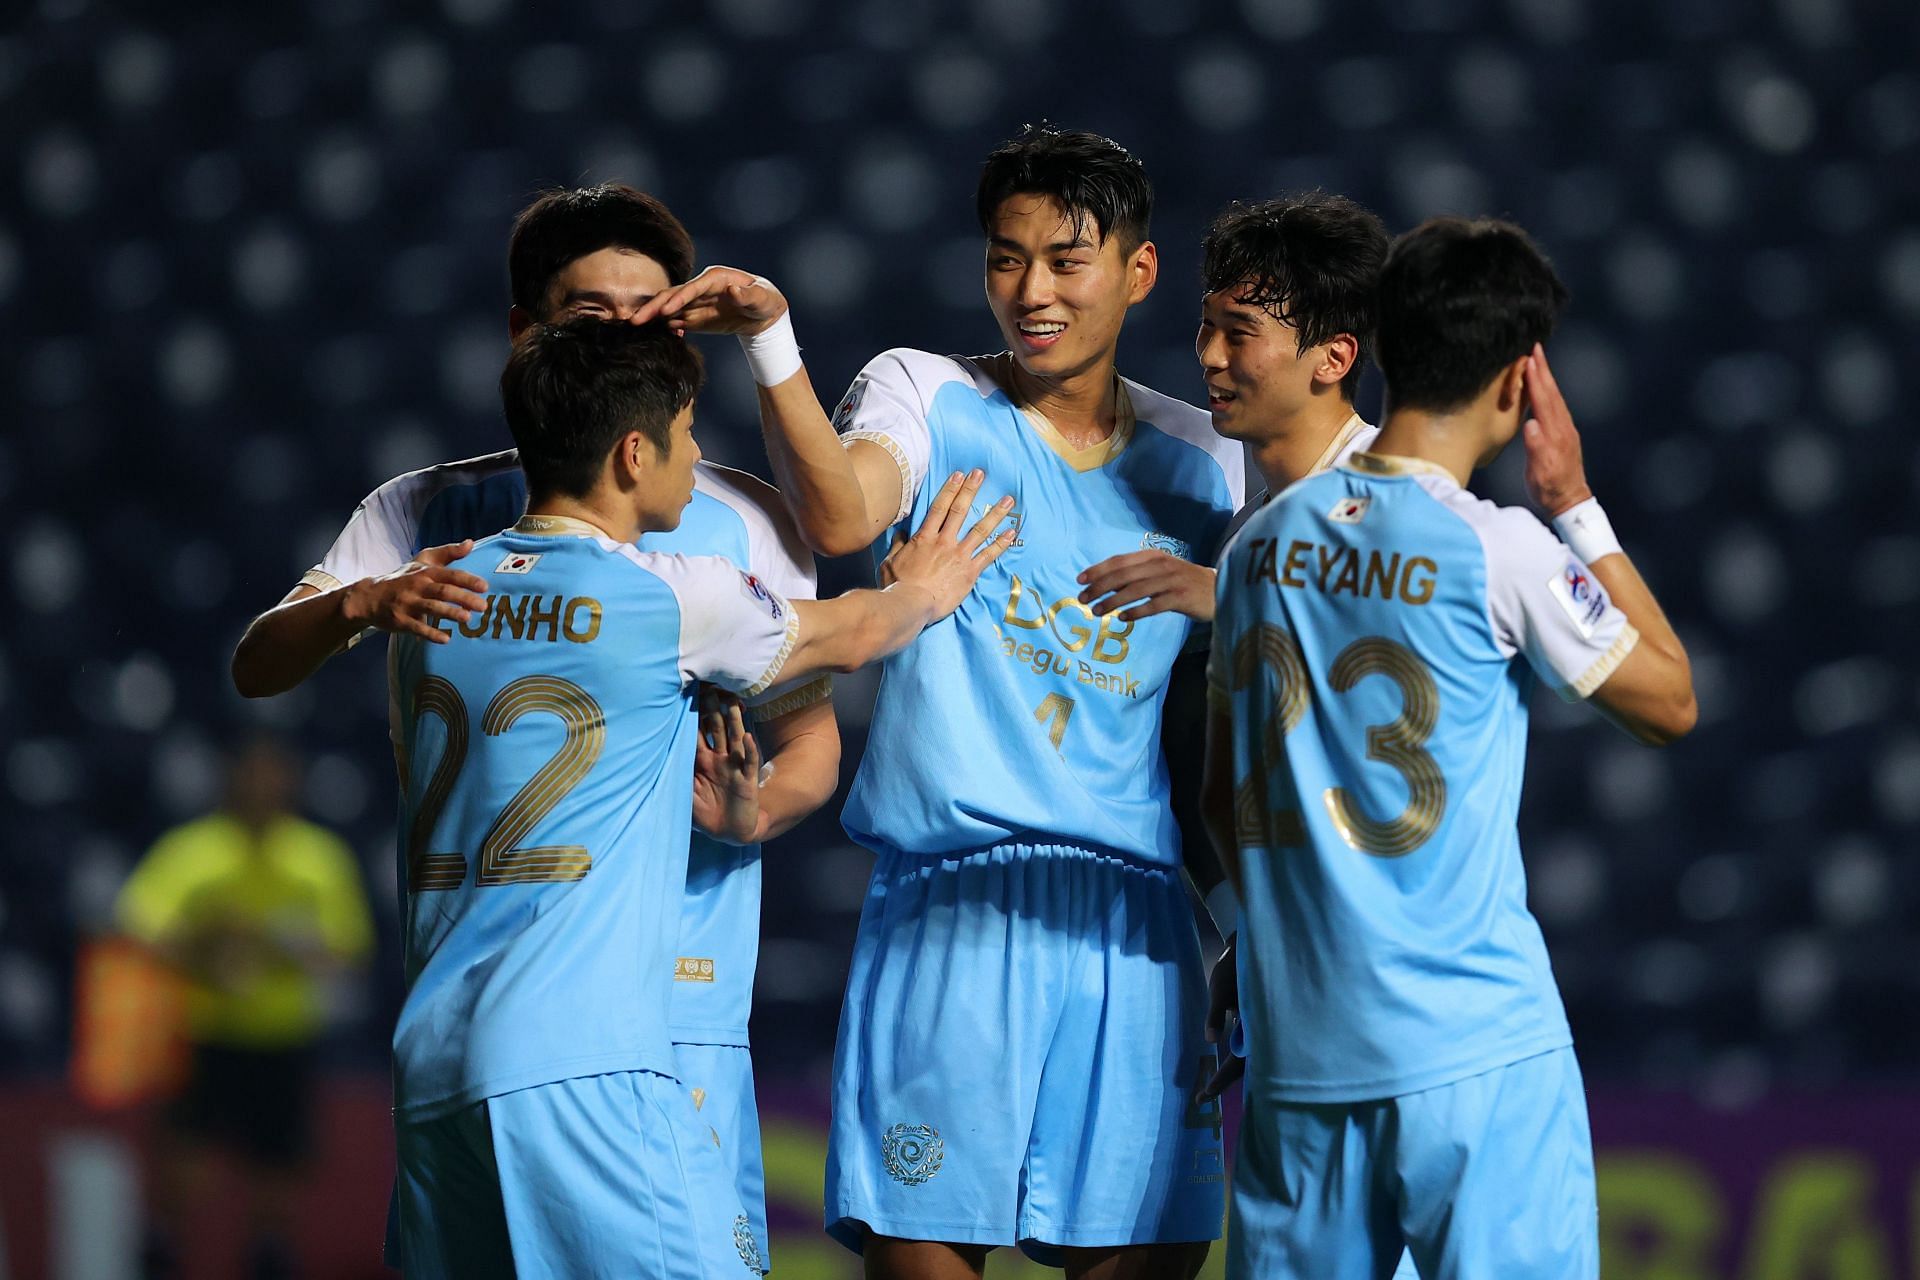 Daegu will square off against Jeonbuk Motors in their AFC Champions League fixture on Thursday